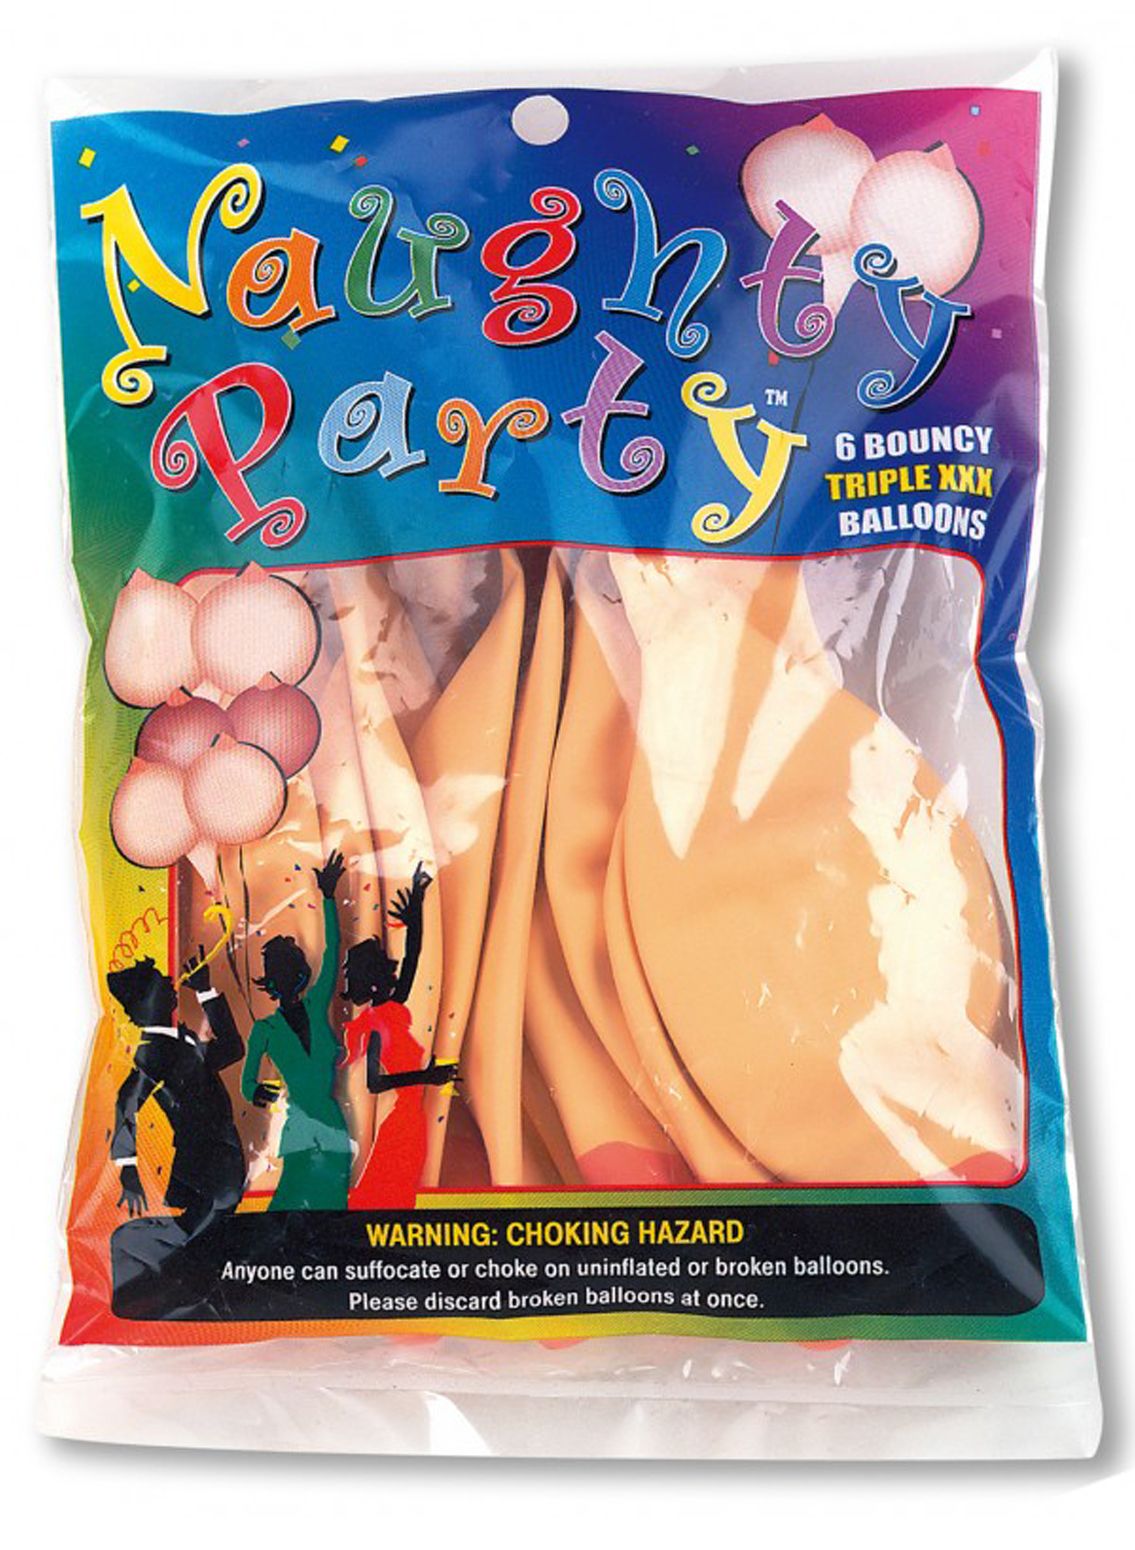 NMC Naughty Party 6 Bouncy Balloons